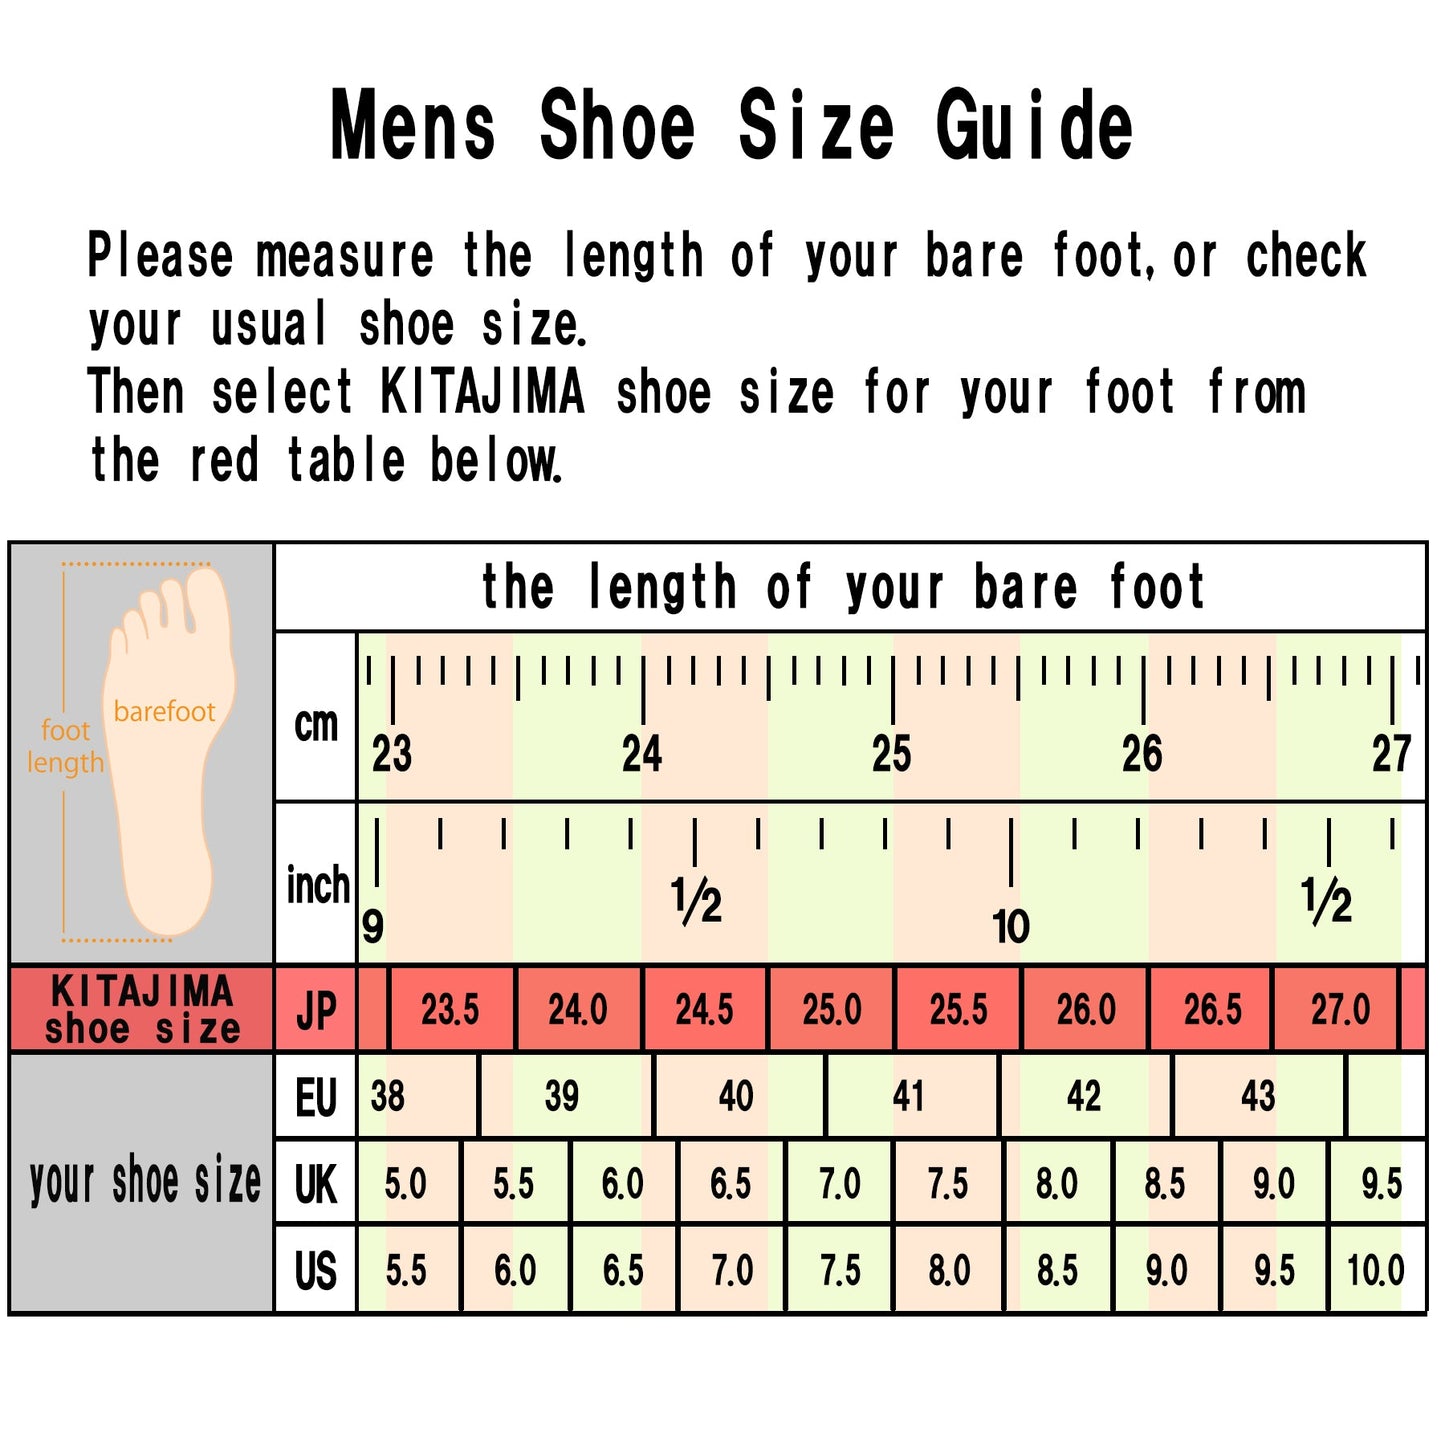 Men's Elevator Shoes Height Increasing 2" Taller Casual Shoes Fashion Sneaker Breathable Mesh No. 994